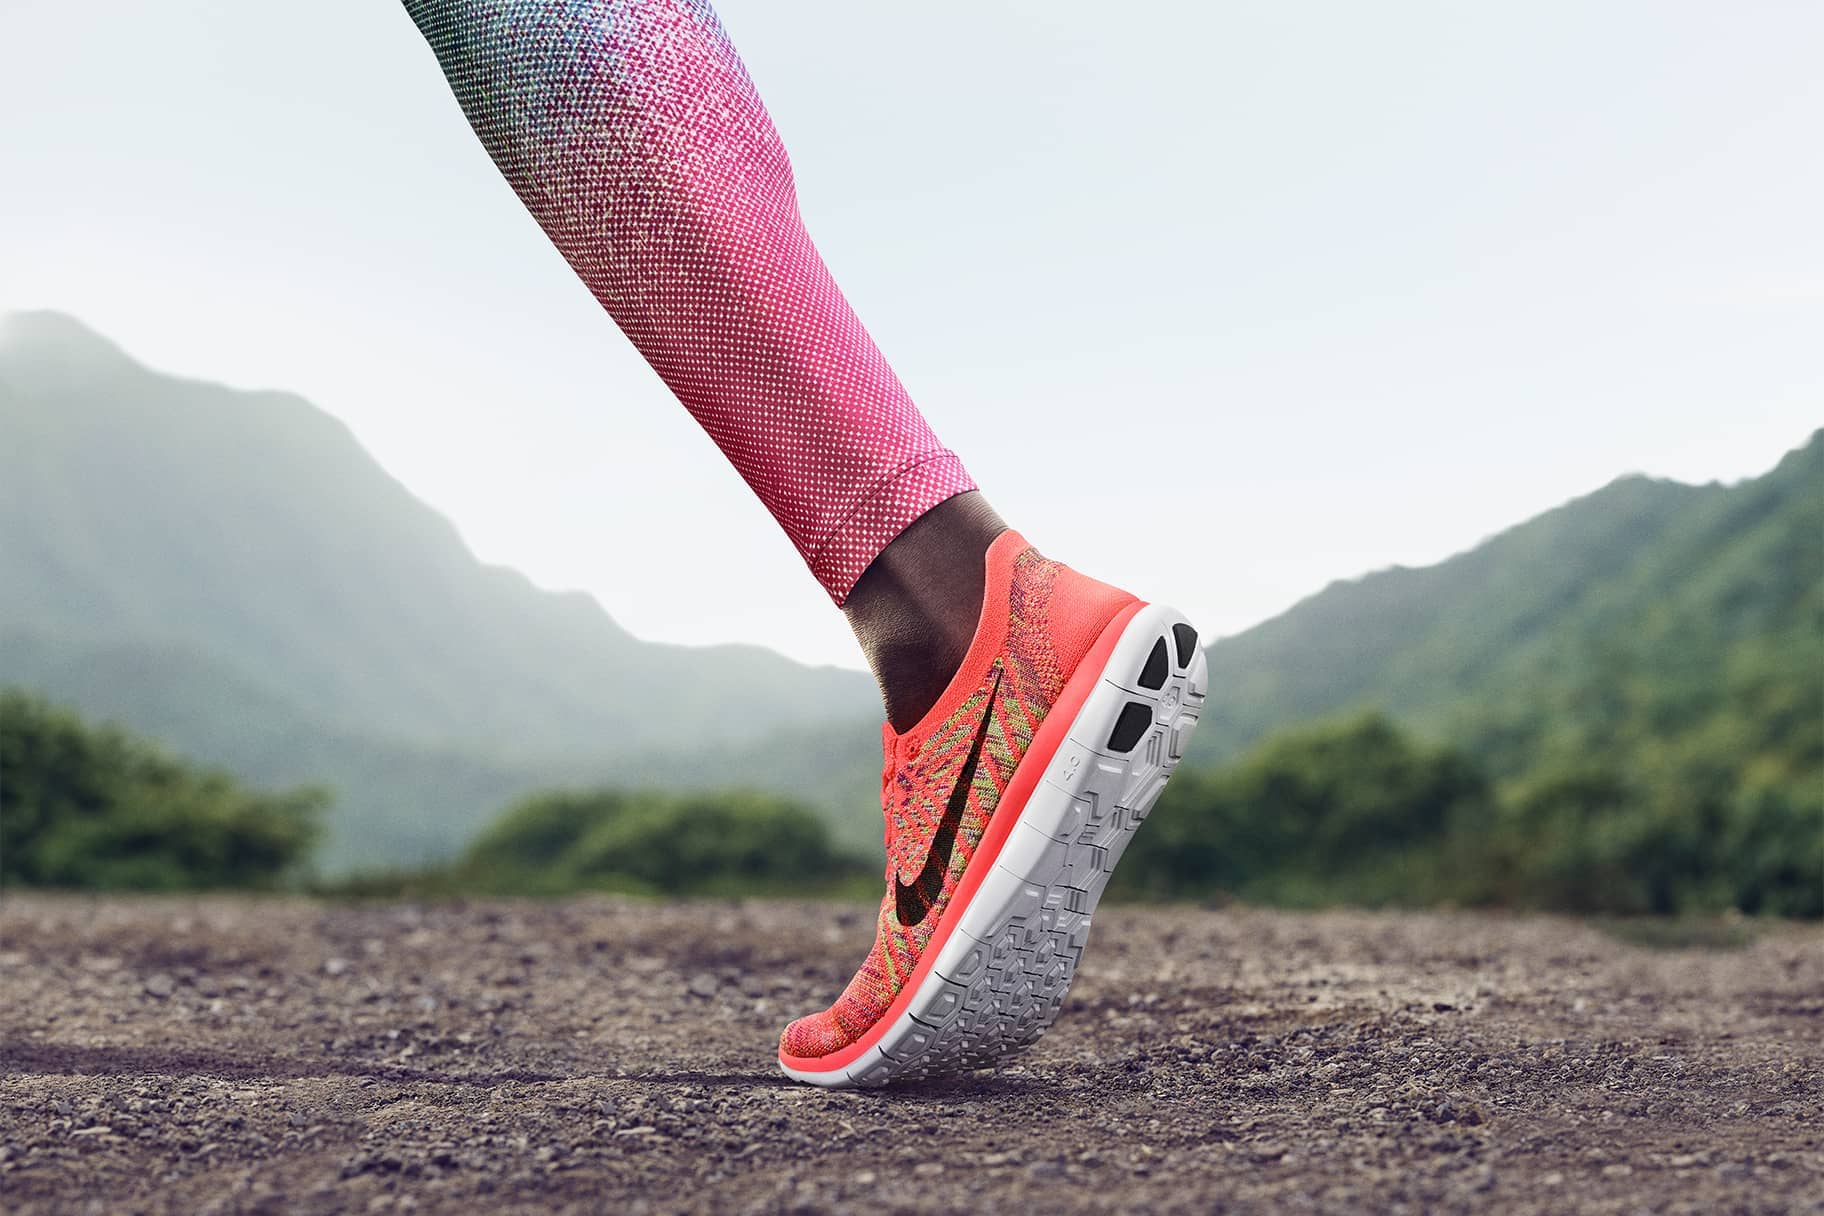 Tips for Buying Minimalist Barefoot Running Shoes. Nike CA